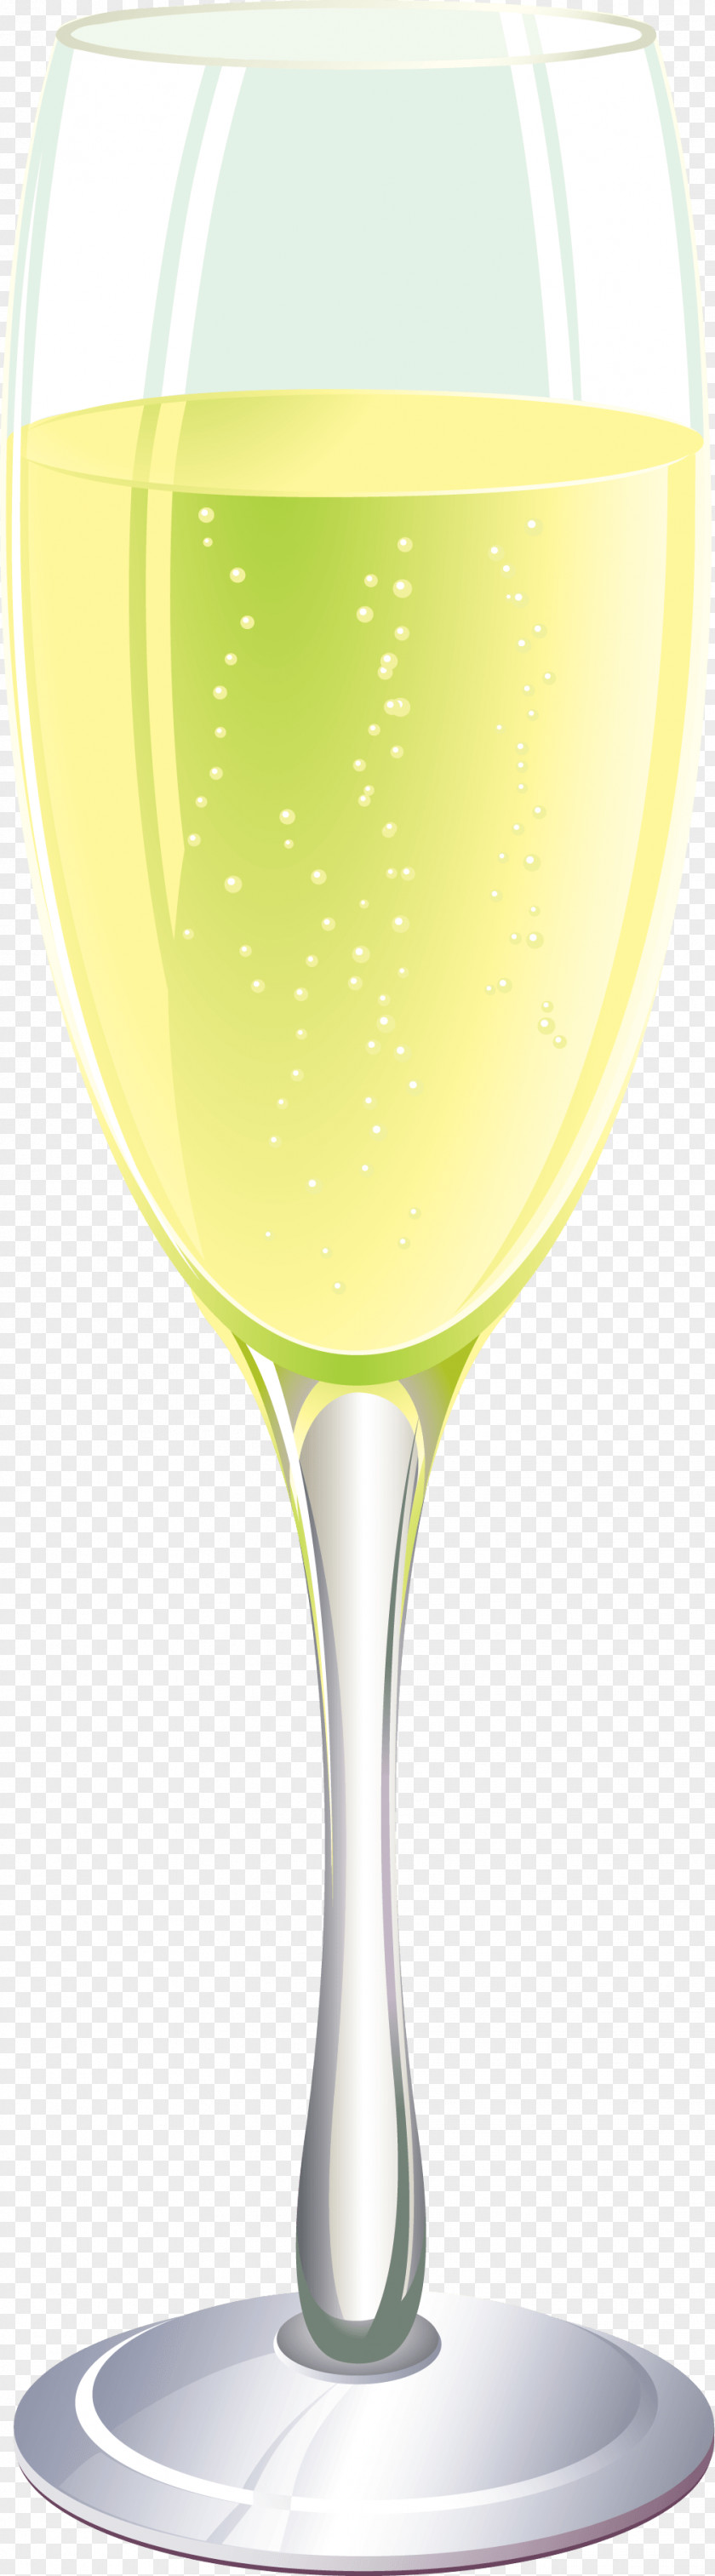 Glass Image PNG